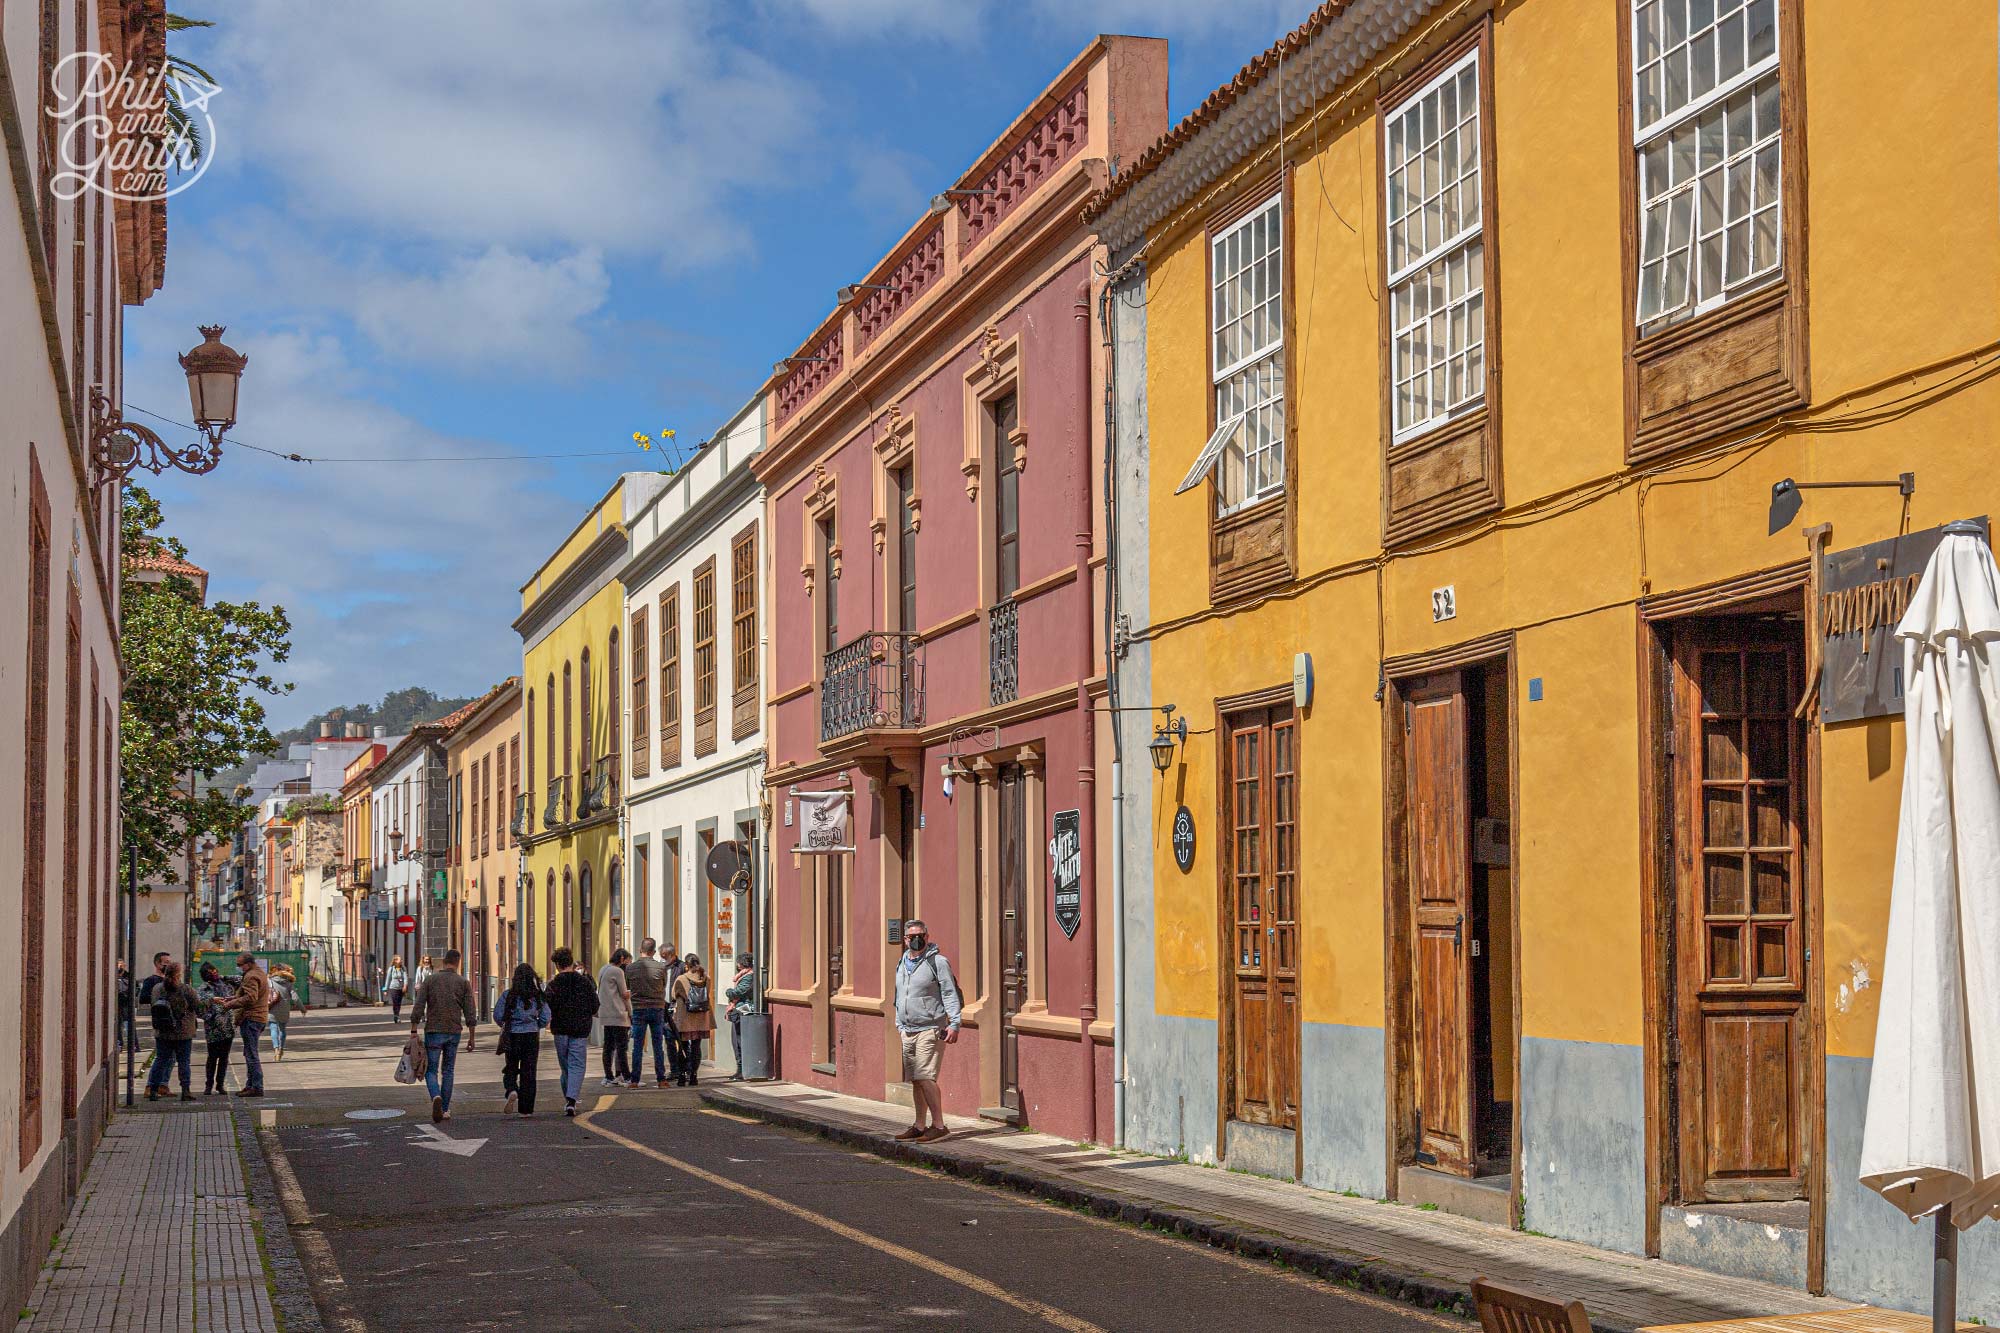 La Laguna is a beautiful and charming town to visit